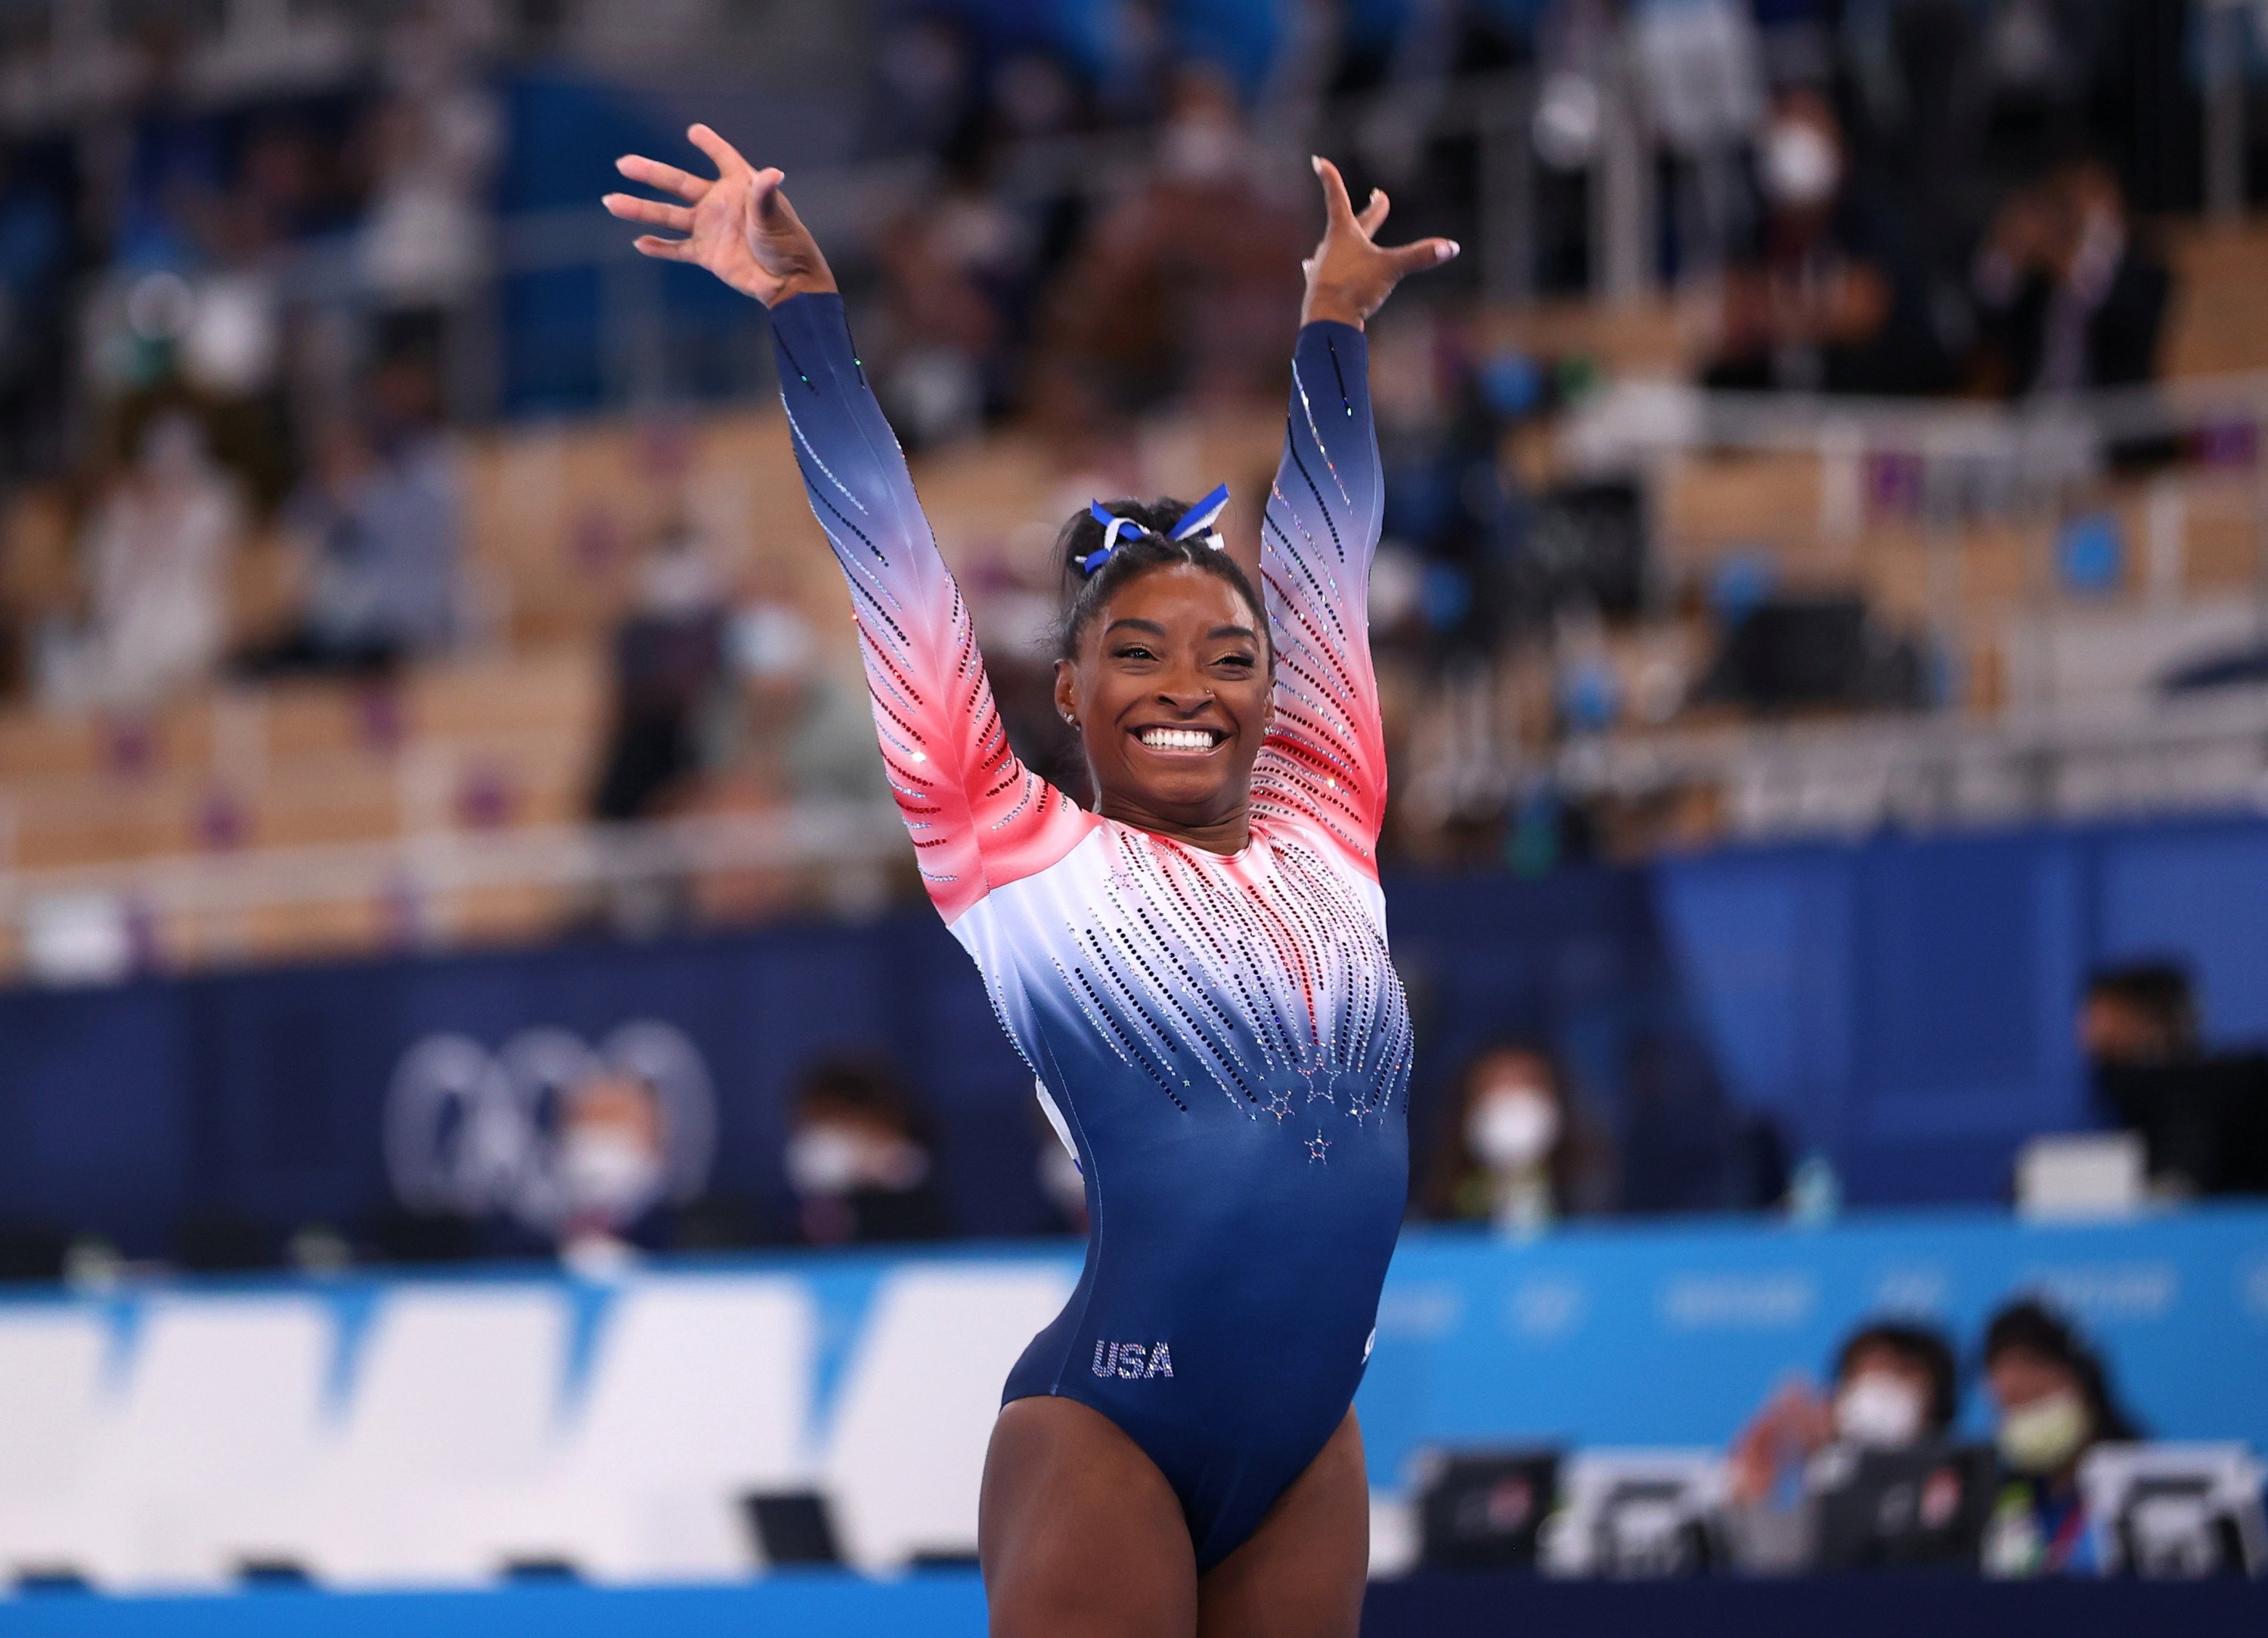 USA's Simone Biles reacts after performing in the Tokyo 2020 Olympics women's beam final, Ariake Gymnastics Centre, Tokyo, Japan, Aug. 3, 2021.